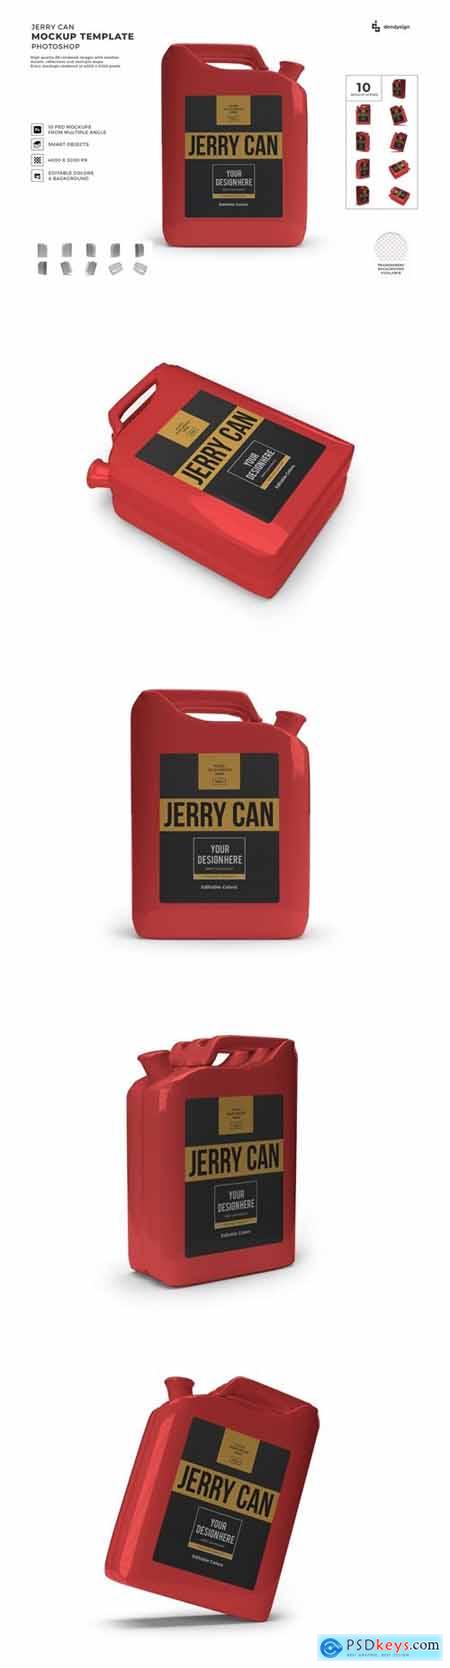 Jerry Can Mockup Template Set